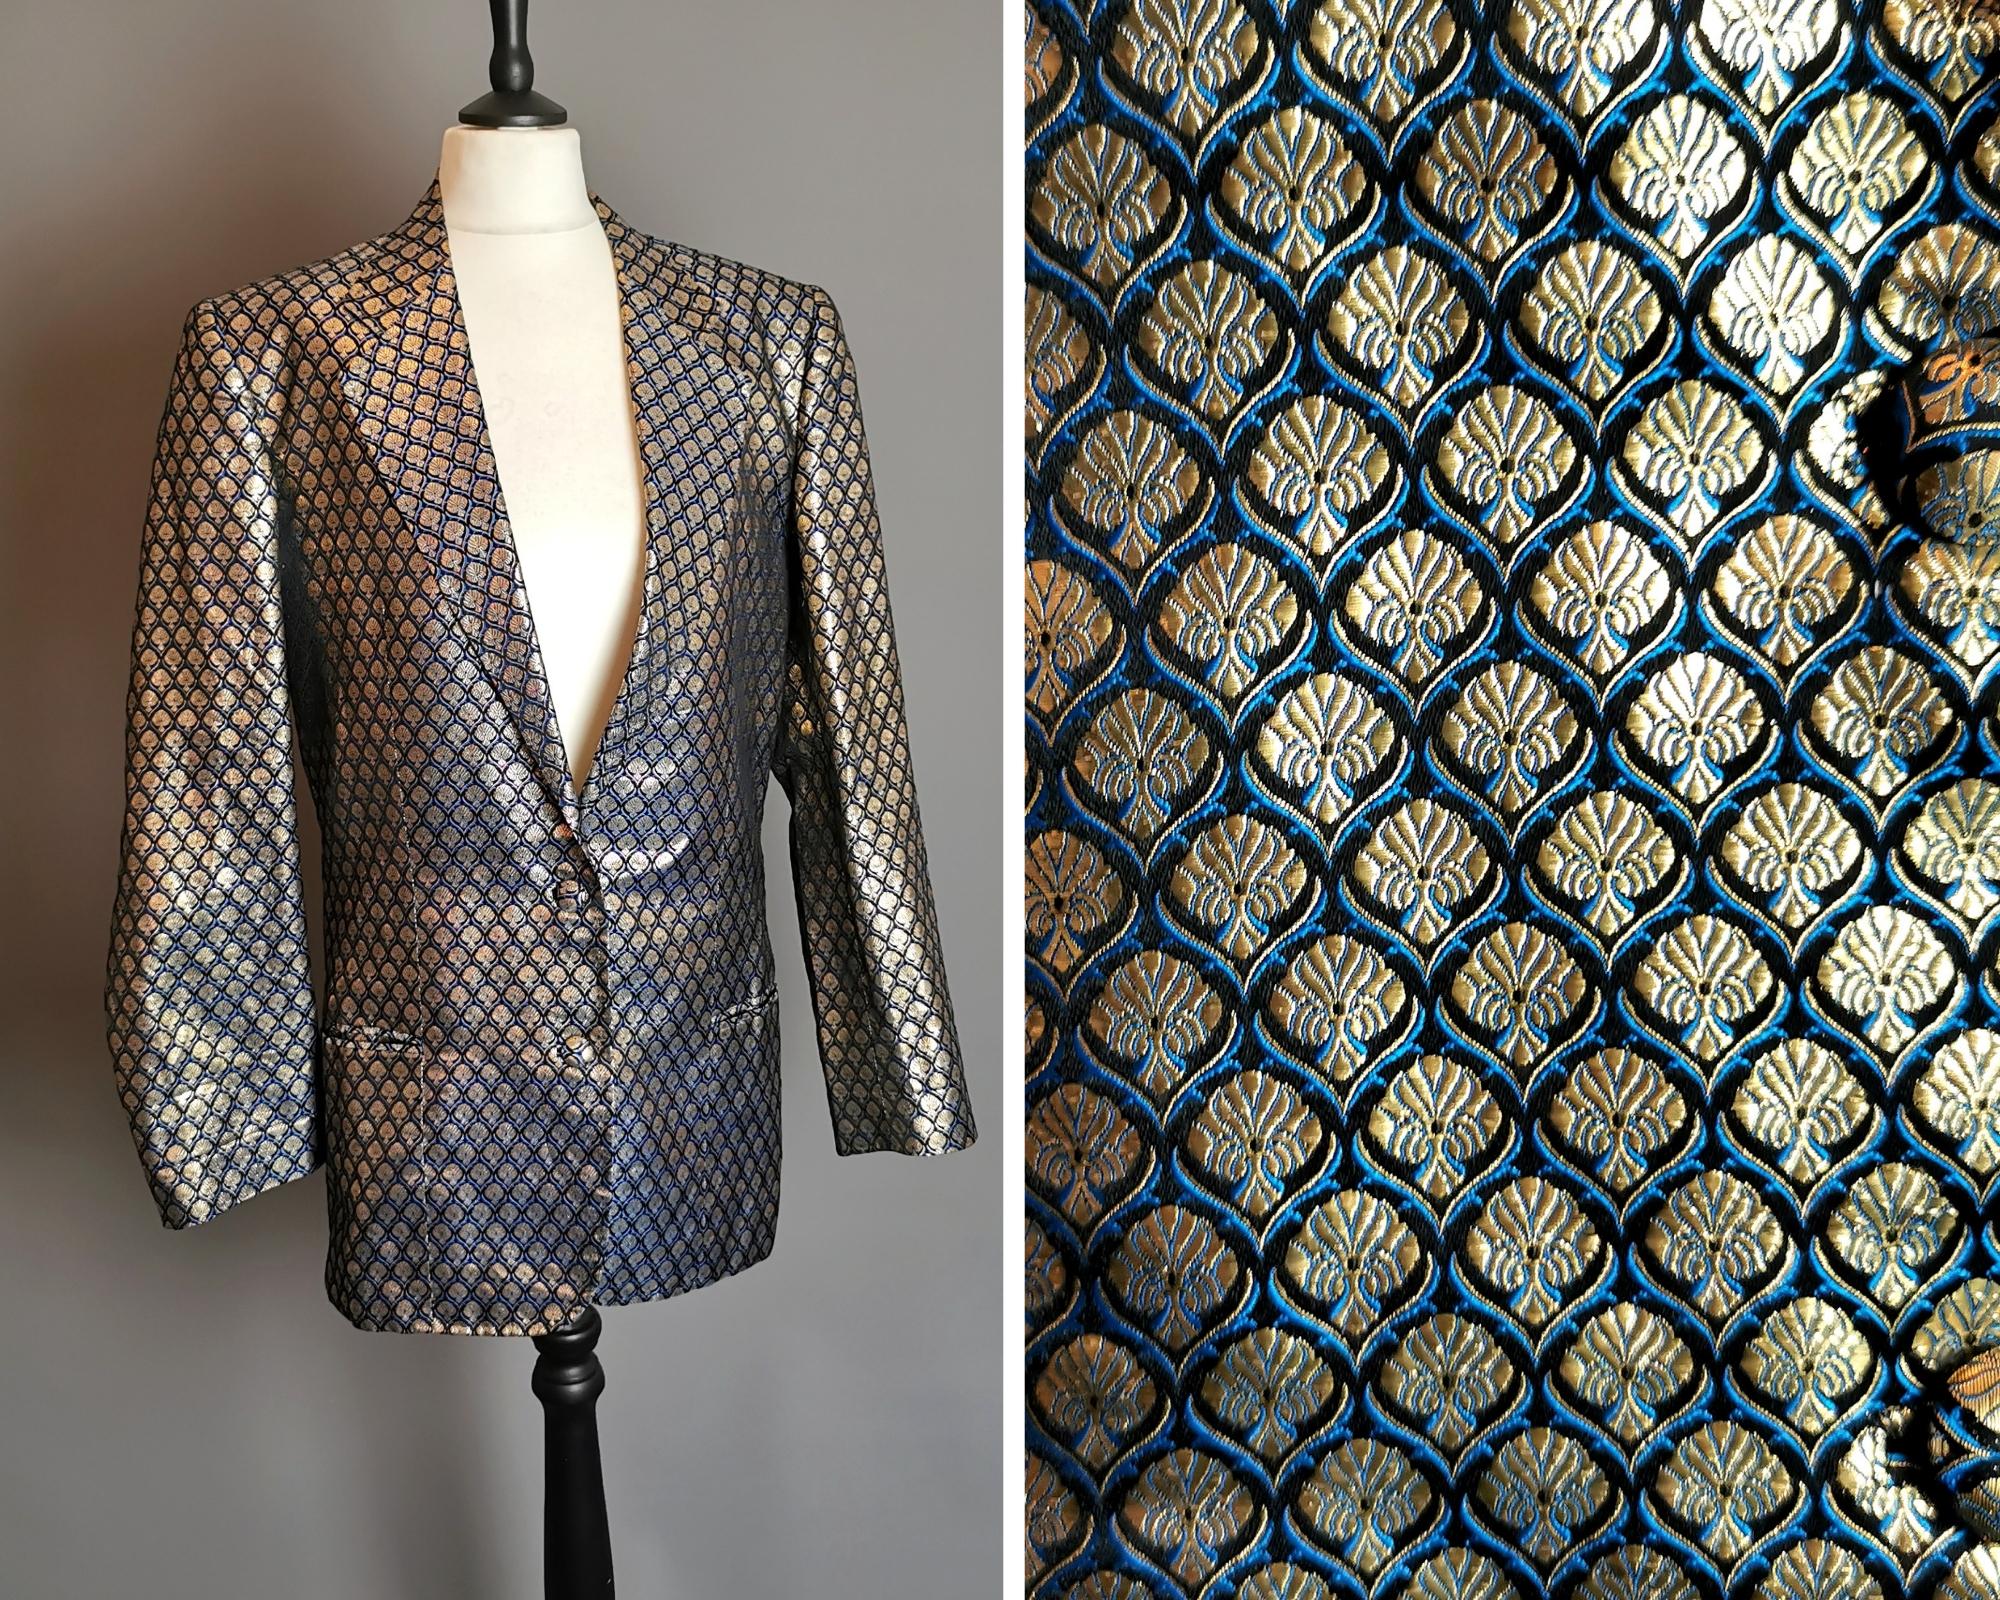 An amazing vintage Italian couture Brocade jacket or blazer.

This gorgeous blazer is designed in a rich royal blue with glistening gold and it has a regal art deco style fan pattern, the fabric slightly embossed.

It has long sleeves and fastens to